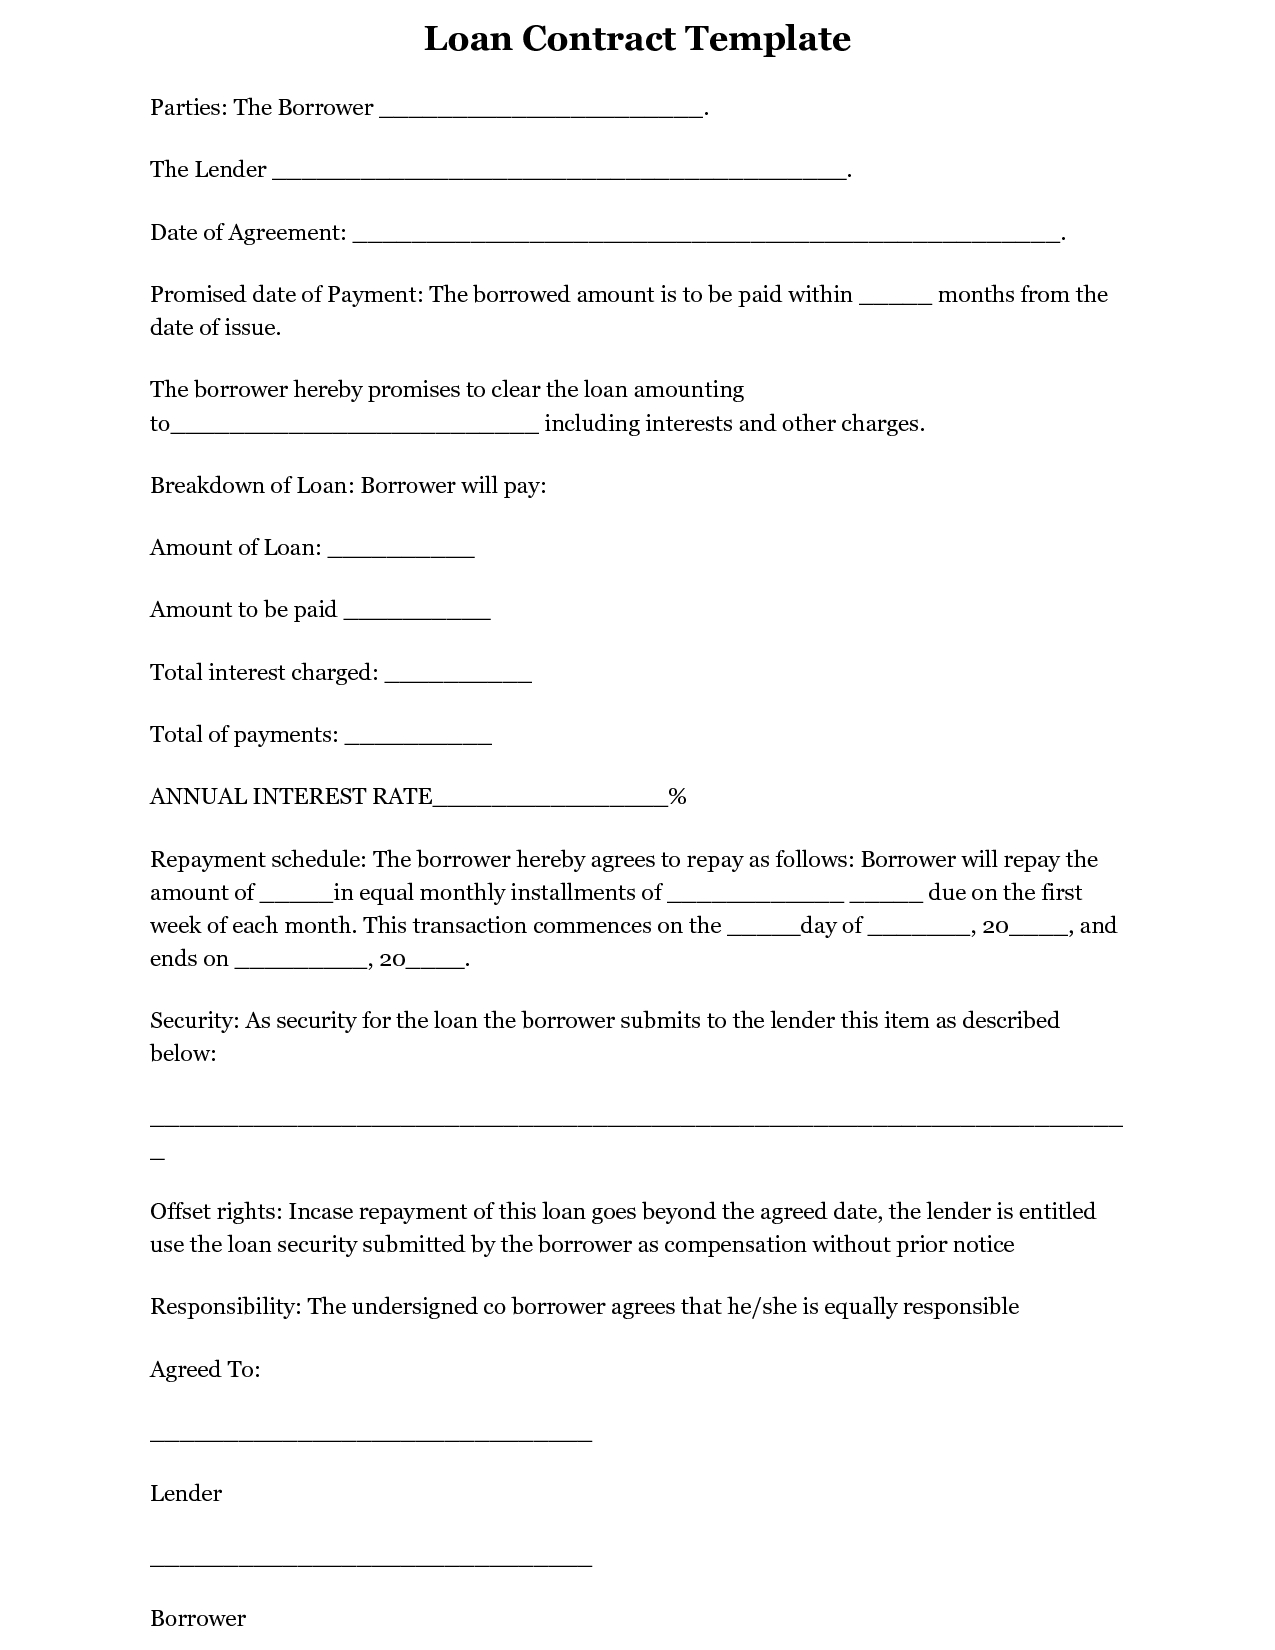 Terrific Blank Loan Contract Or Agreement Template Sample Within Blank Loan Agreement Template